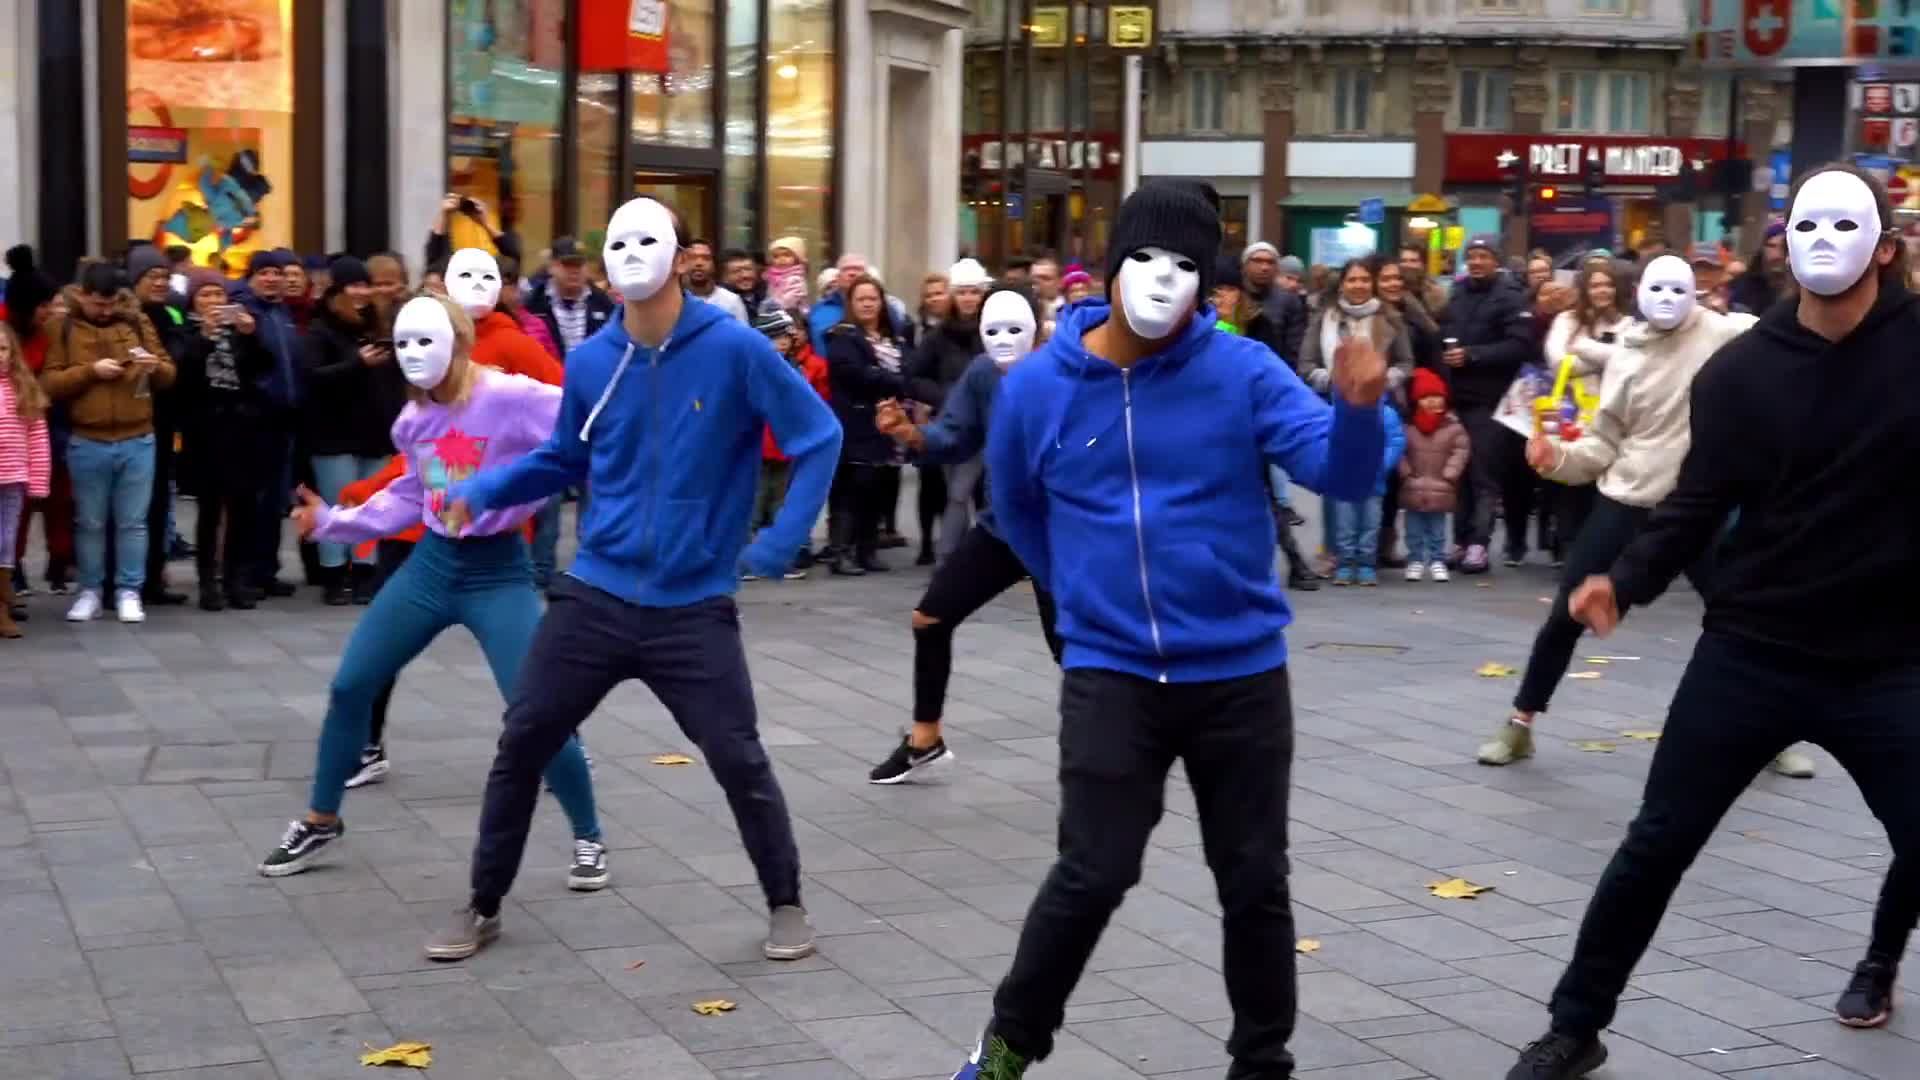 Epic Proposal Flash Mob - Guy Joins in, and is AMAZING!